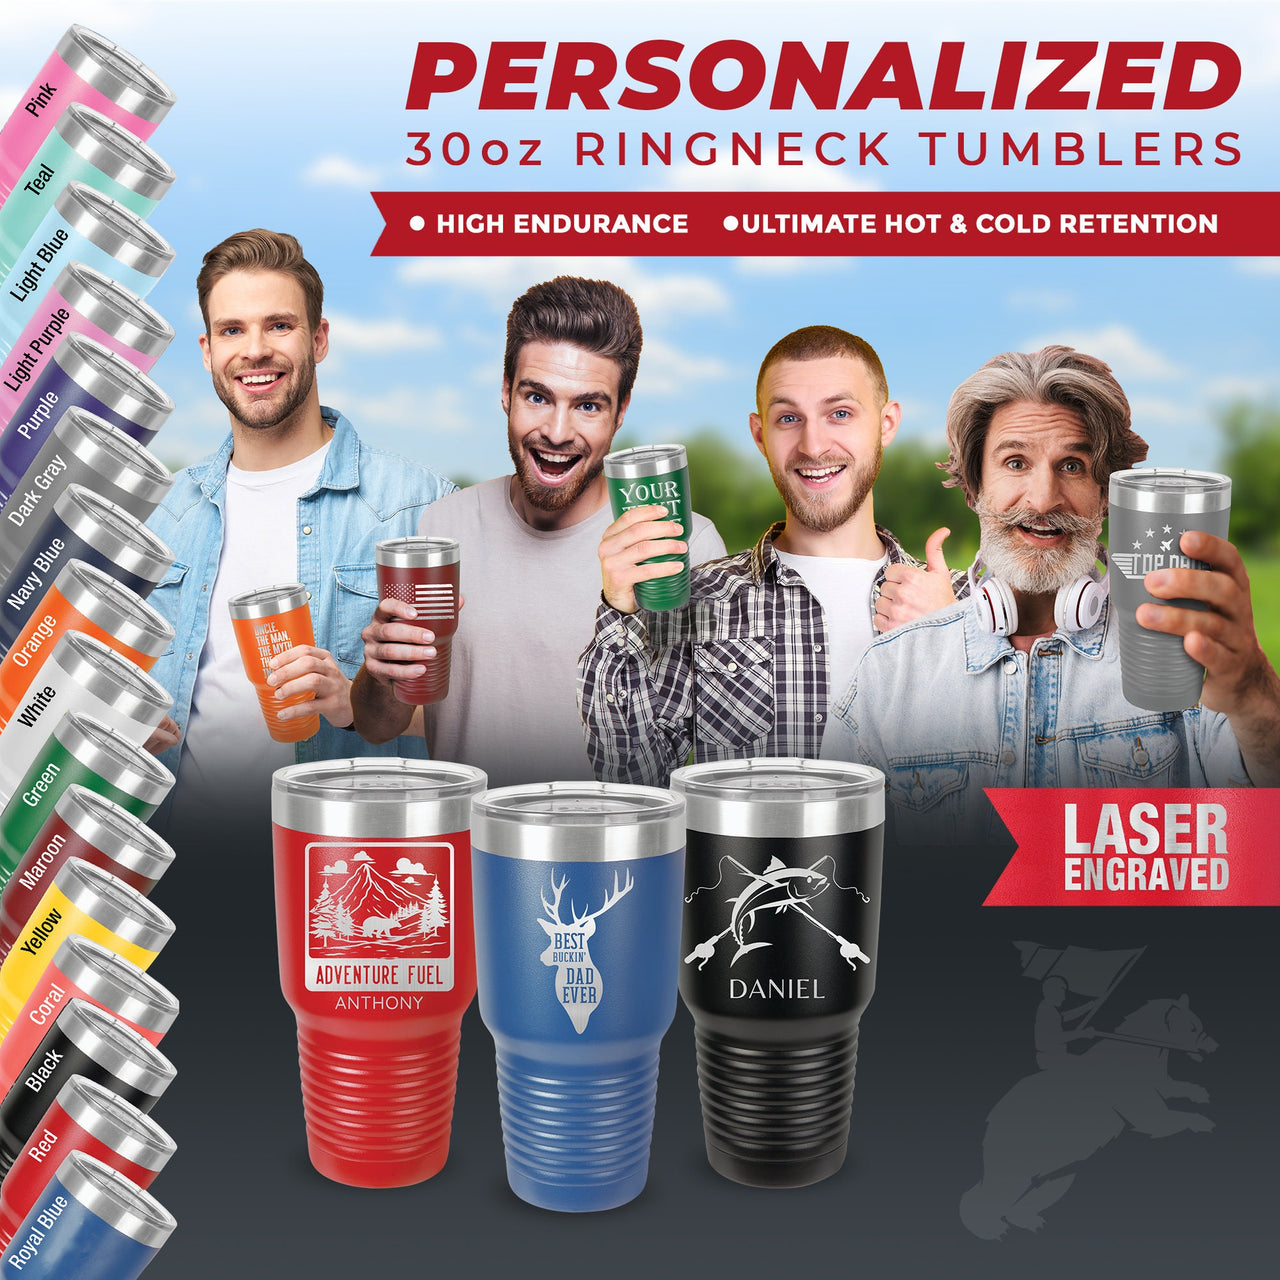 Super Dad Personalized Engraved Tumbler Gifts